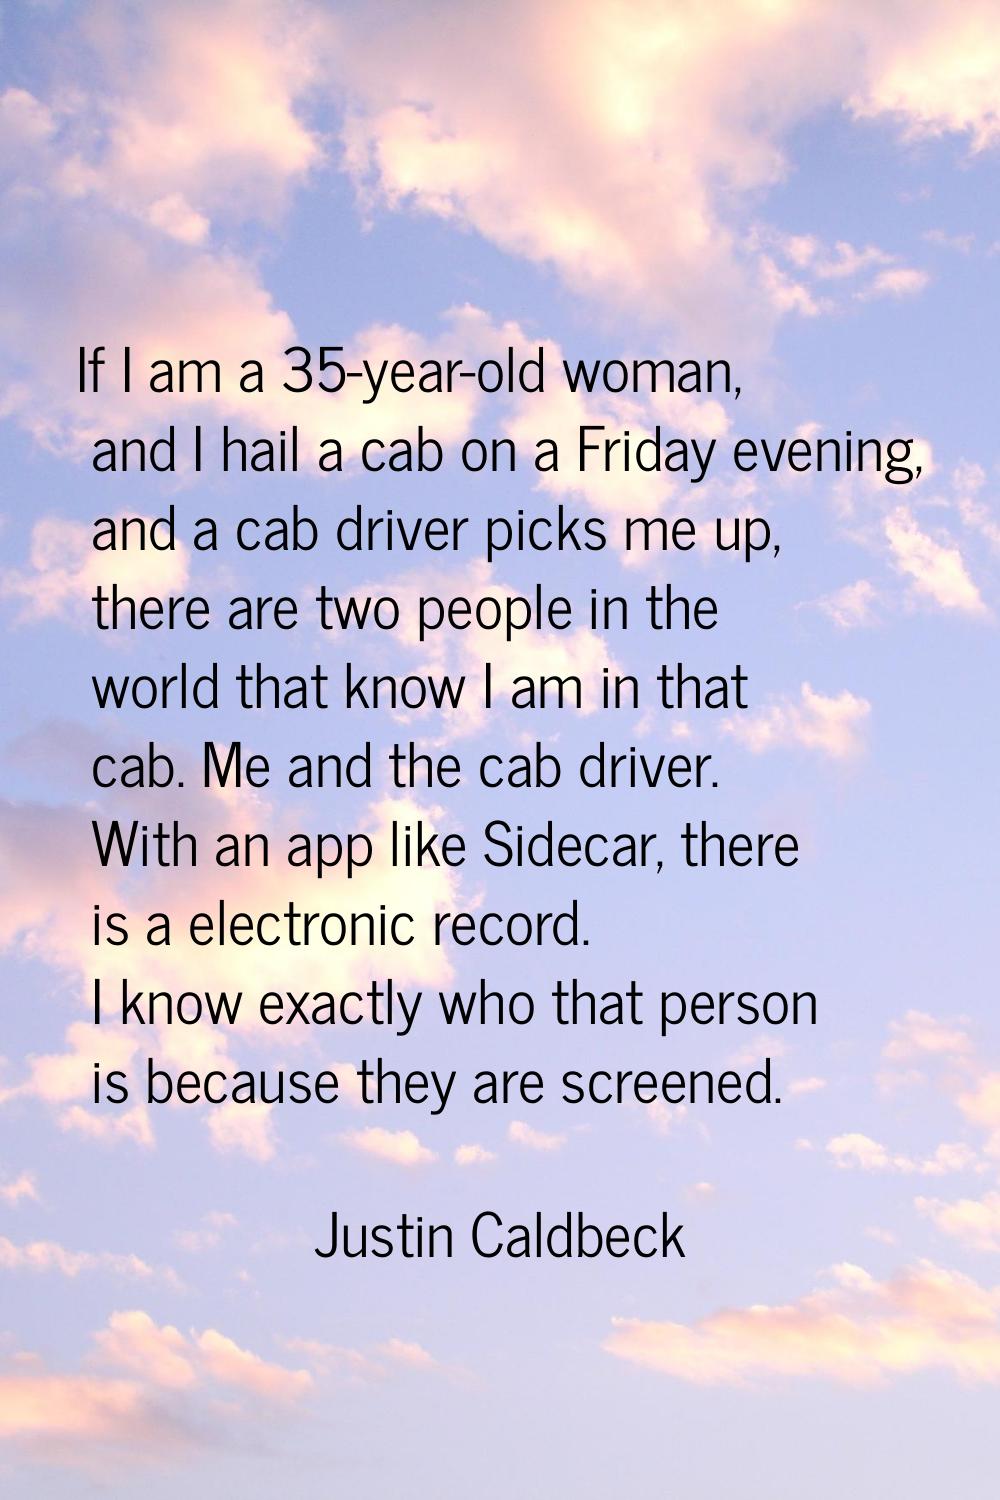 If I am a 35-year-old woman, and I hail a cab on a Friday evening, and a cab driver picks me up, th